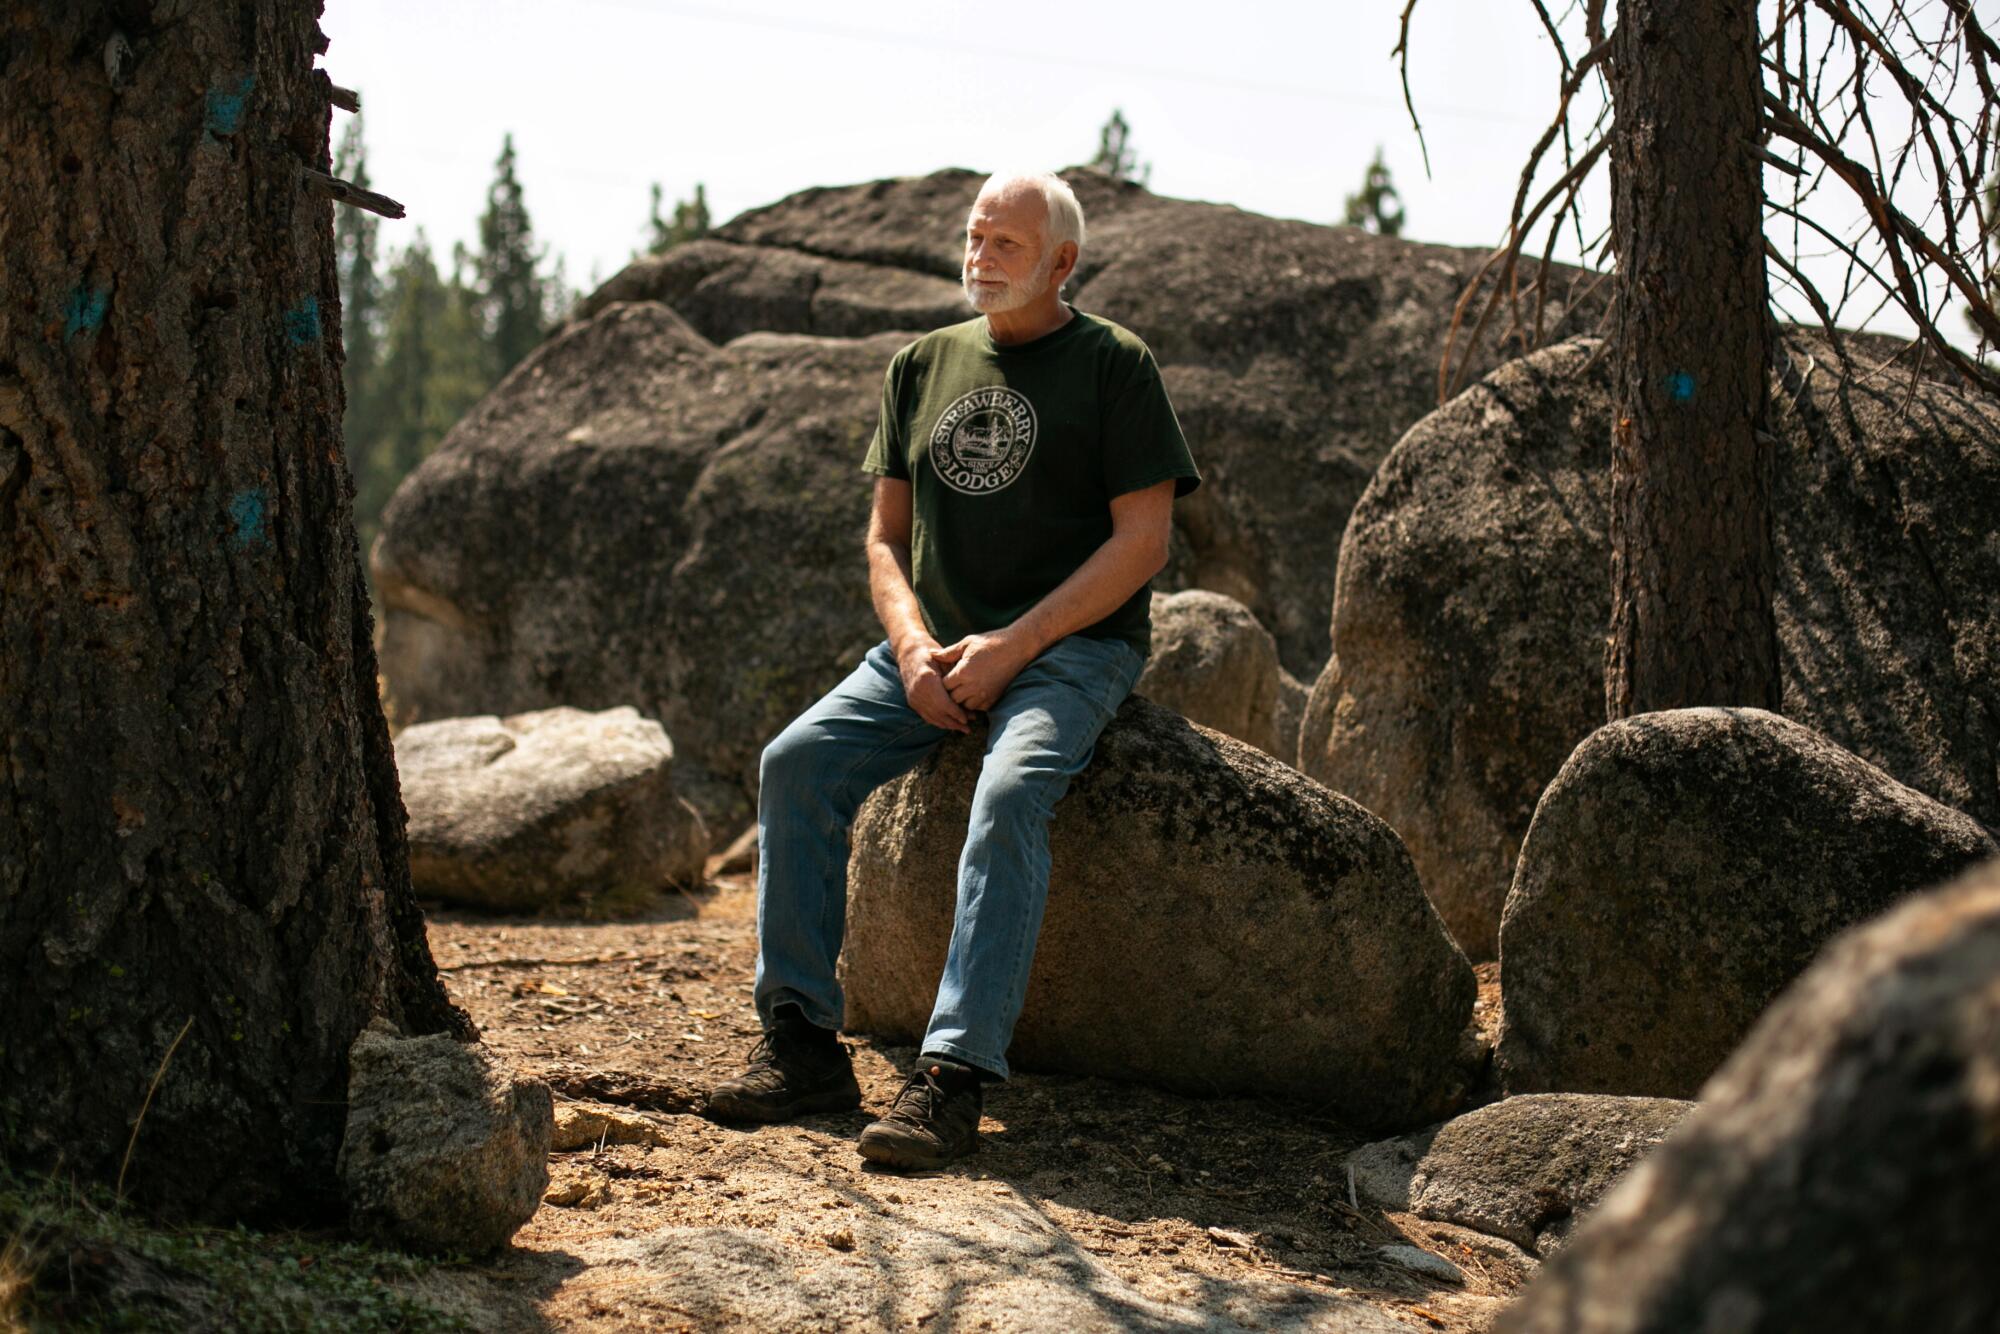  Michael Hicks sits outside on a large rock